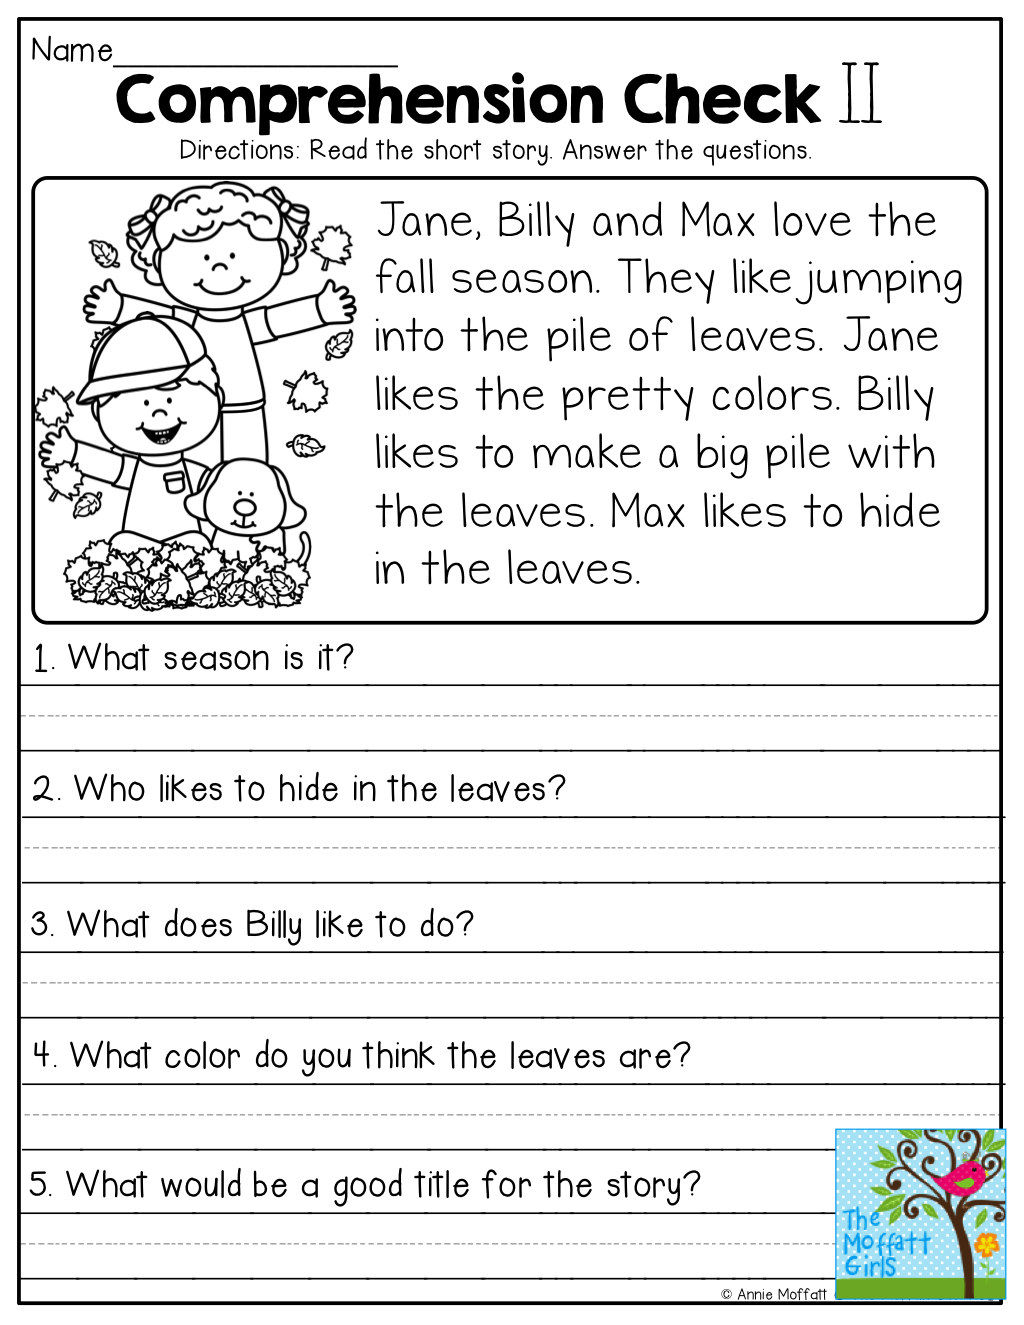 Comprehension Checks And So Many More Useful Printables! | Test Of - Free Printable Grade 1 Reading Comprehension Worksheets